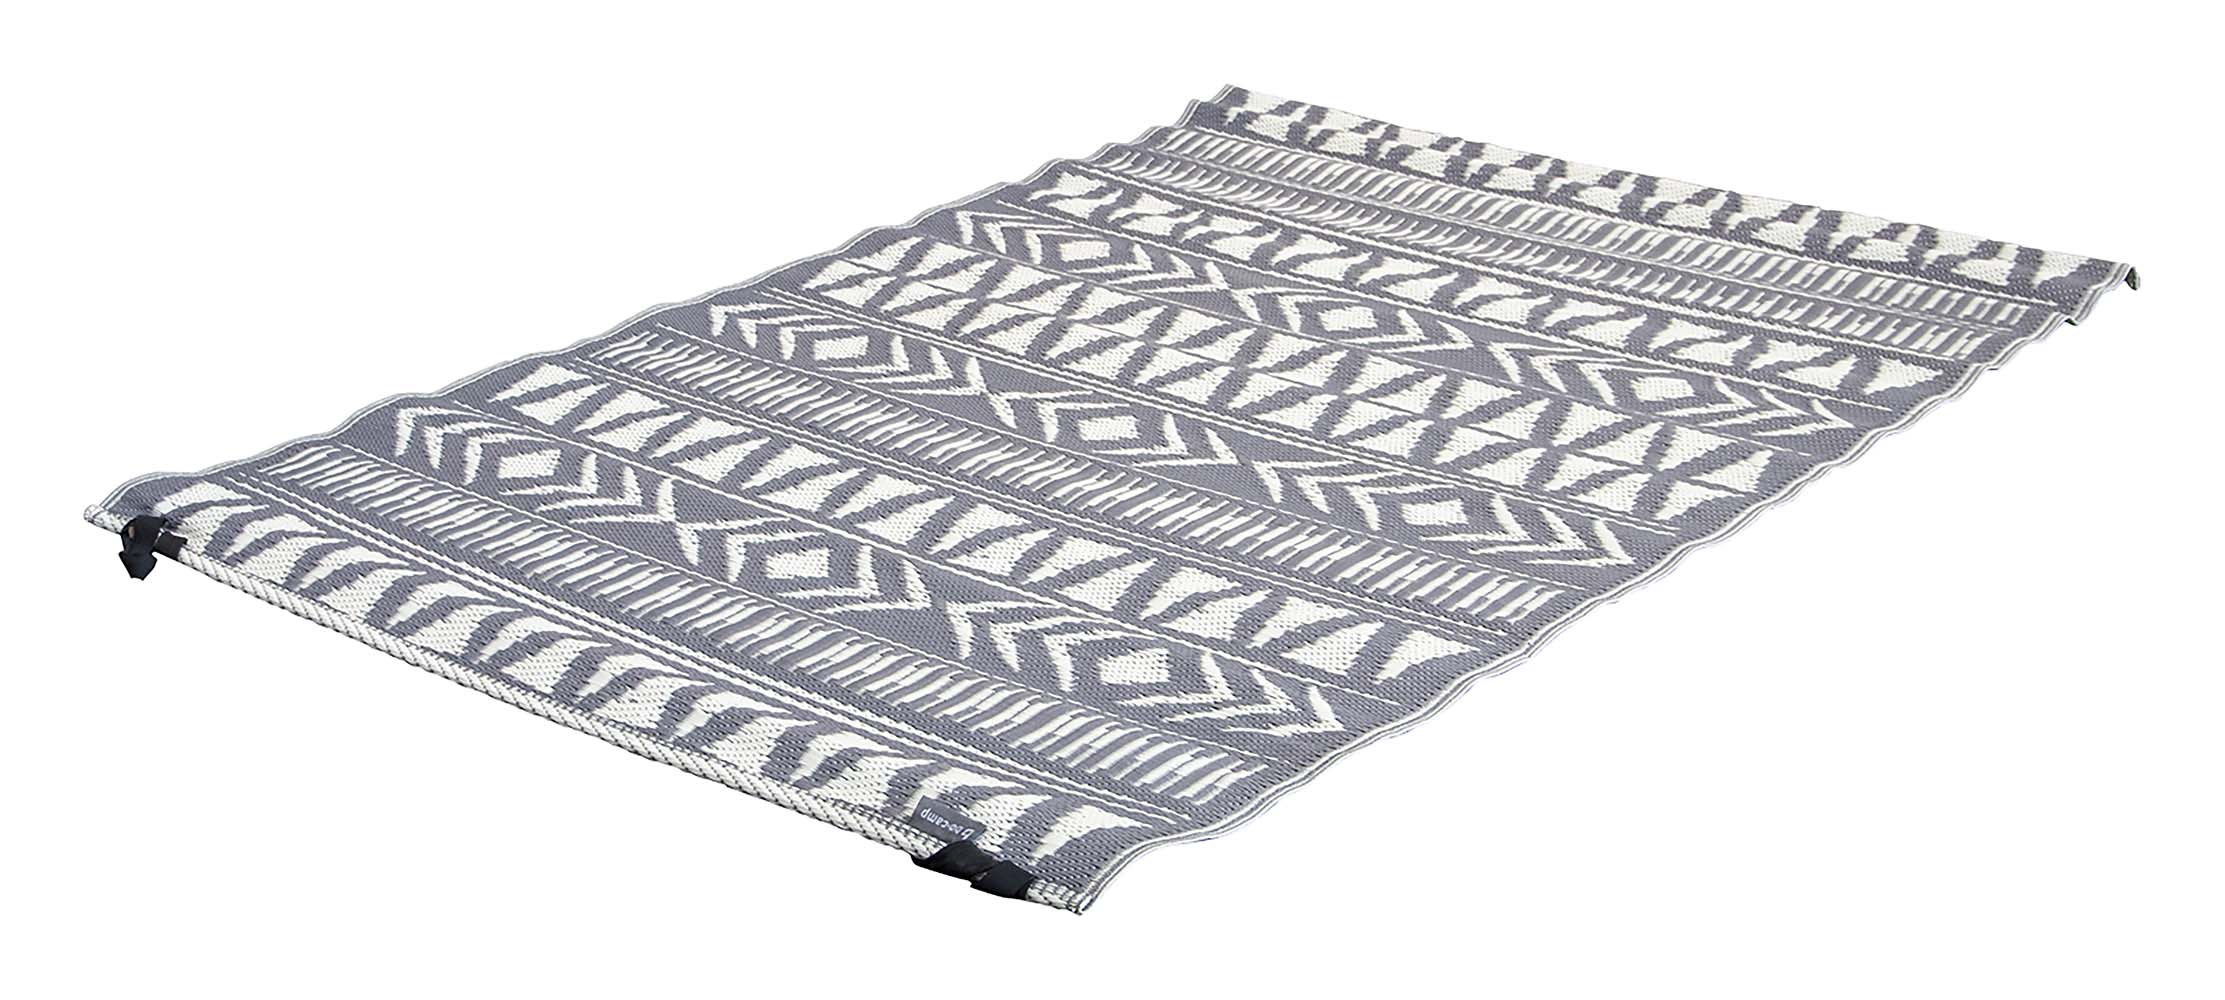 4271038 A multifunctional outdoor rug with a cool print. Decorated on both sides, making this rug usable on both sides. This garden carpet is waterproof, mold resistant and UV protected which ensures a long life. Ideal as picnic rug, (front) tent rug, under the awning, in the park, on the beach or in the garden. This outdoor rug is made of high quality and lightweight 100% polypropylene (380 gr/m²). Comes in a handy carrying bag.